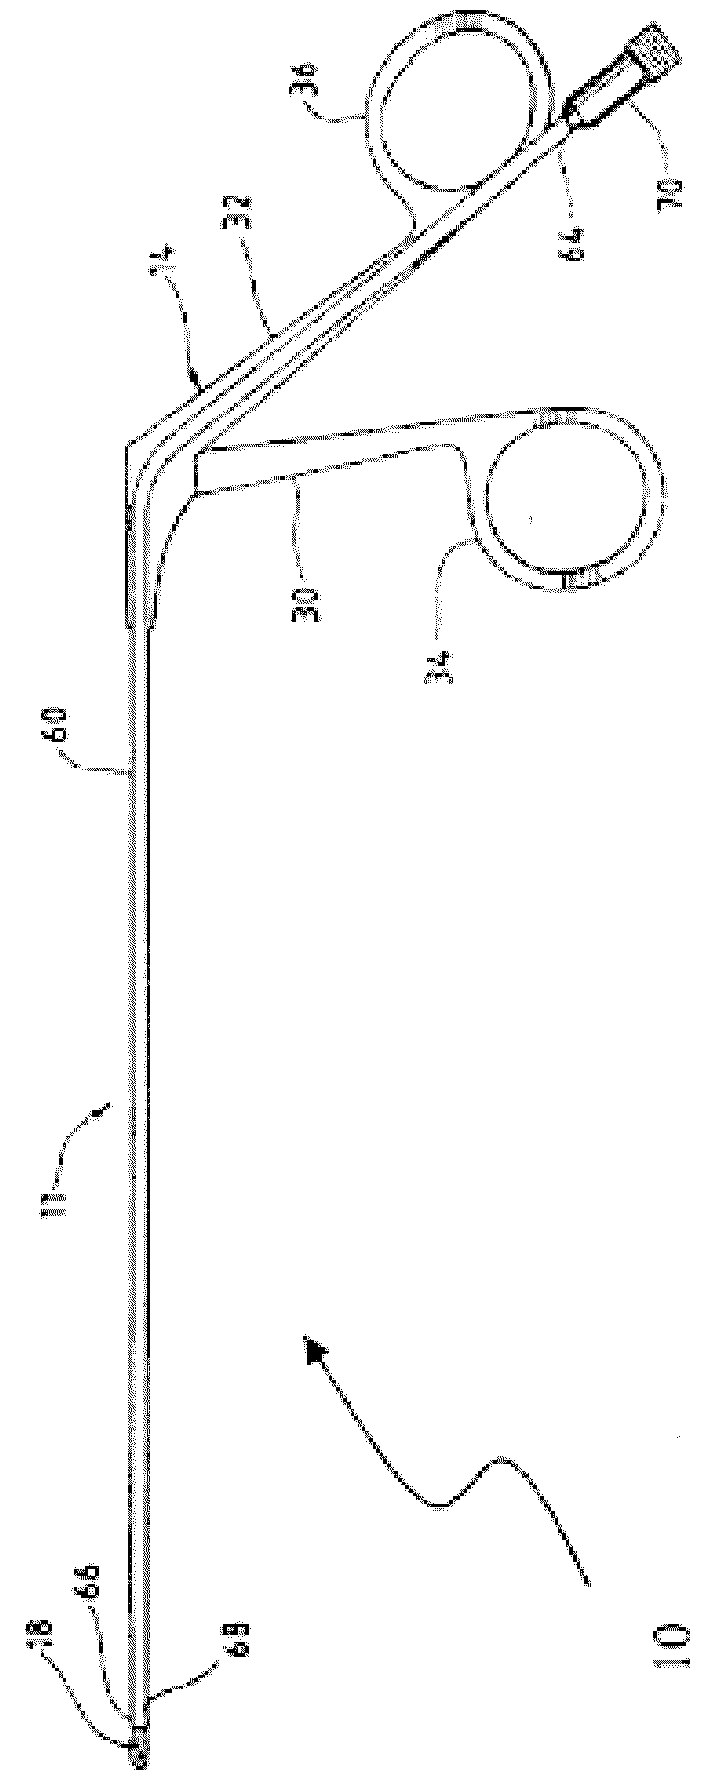 Tissue visualization and modification devices and methods